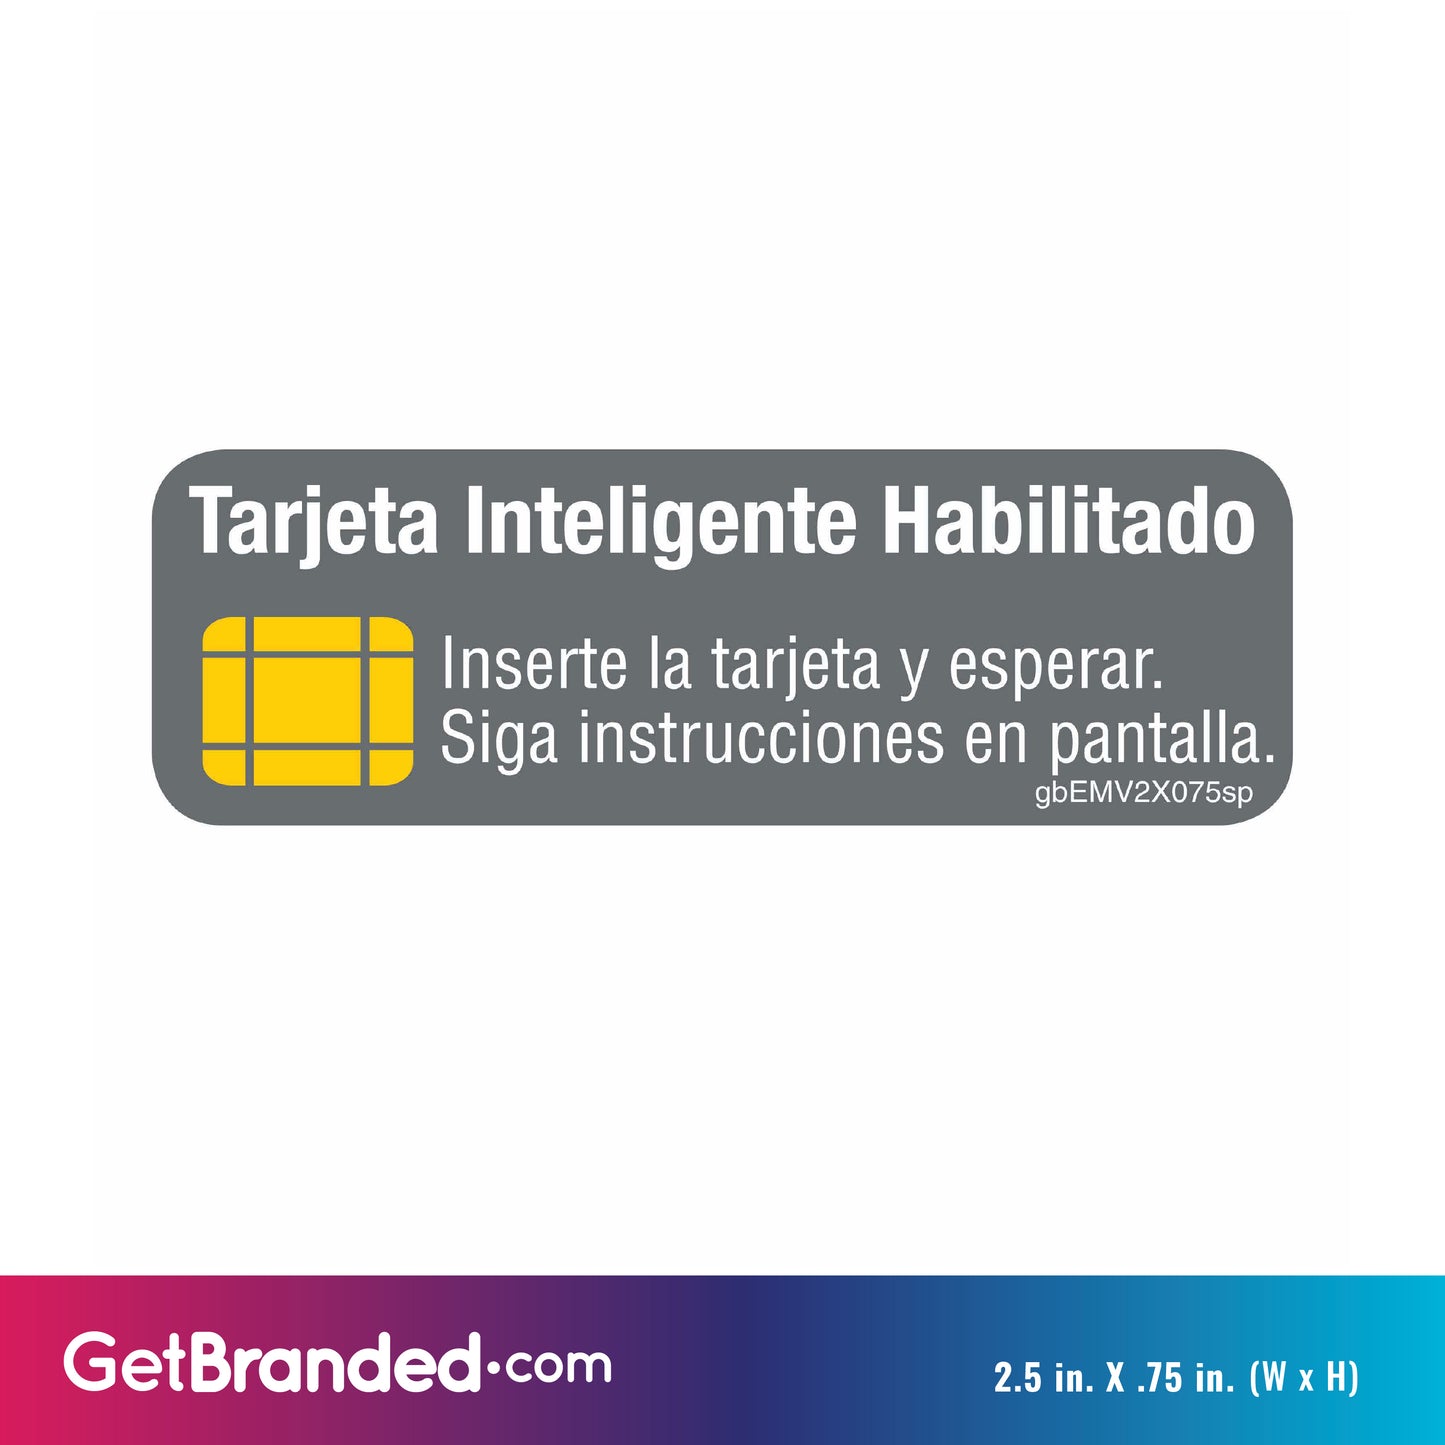 Smart Card Decal in Spanish size guide.